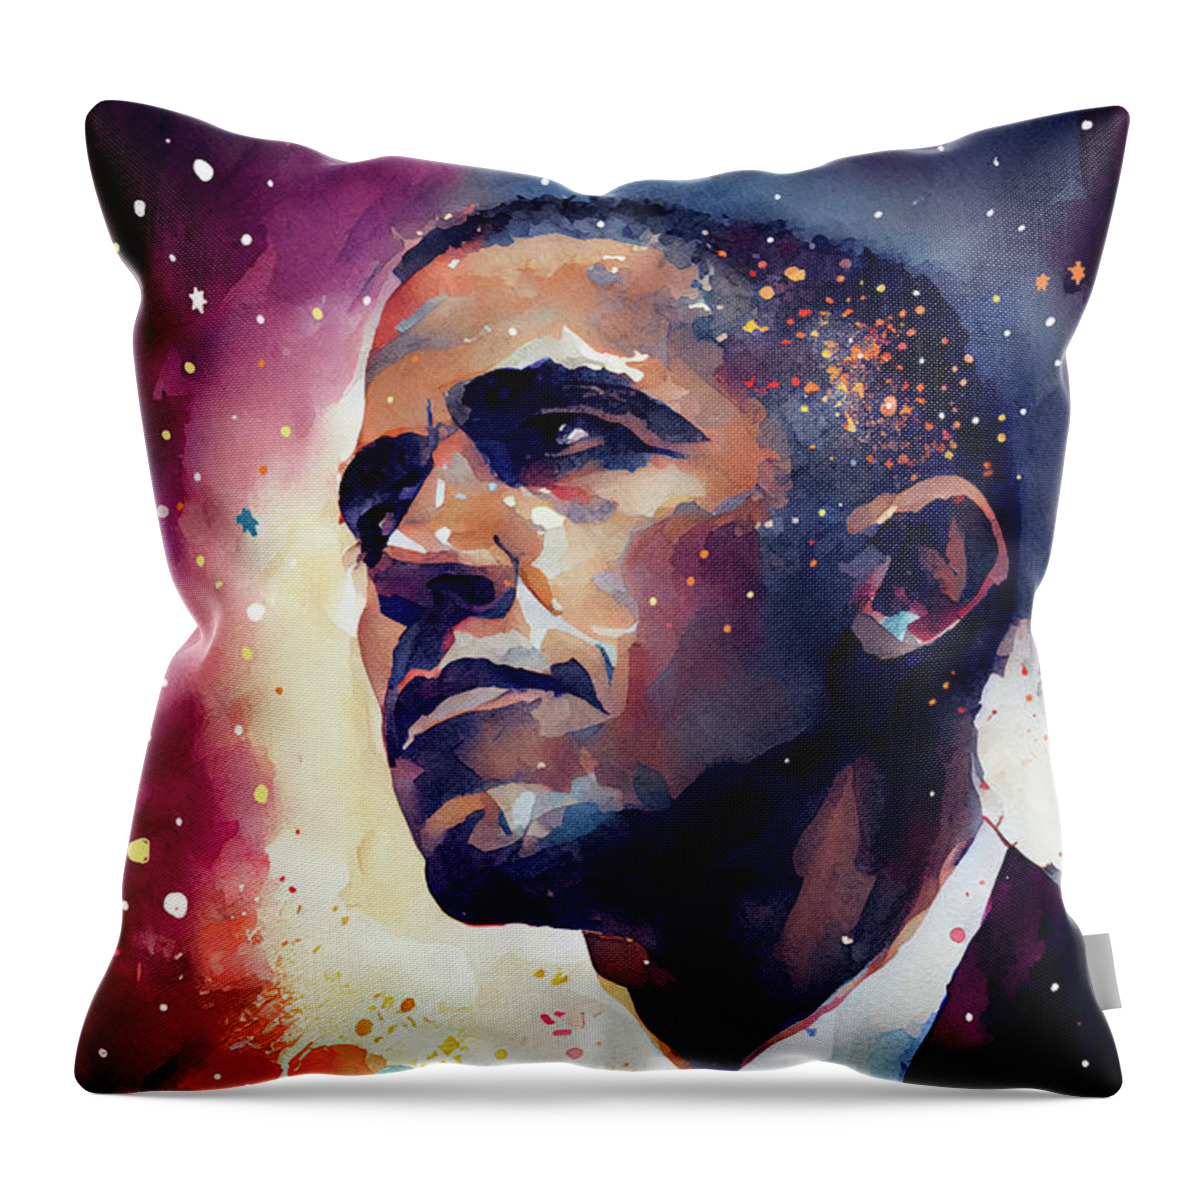 Obama Throw Pillow featuring the digital art President Obama Reaching For The Stars by Mark Tisdale